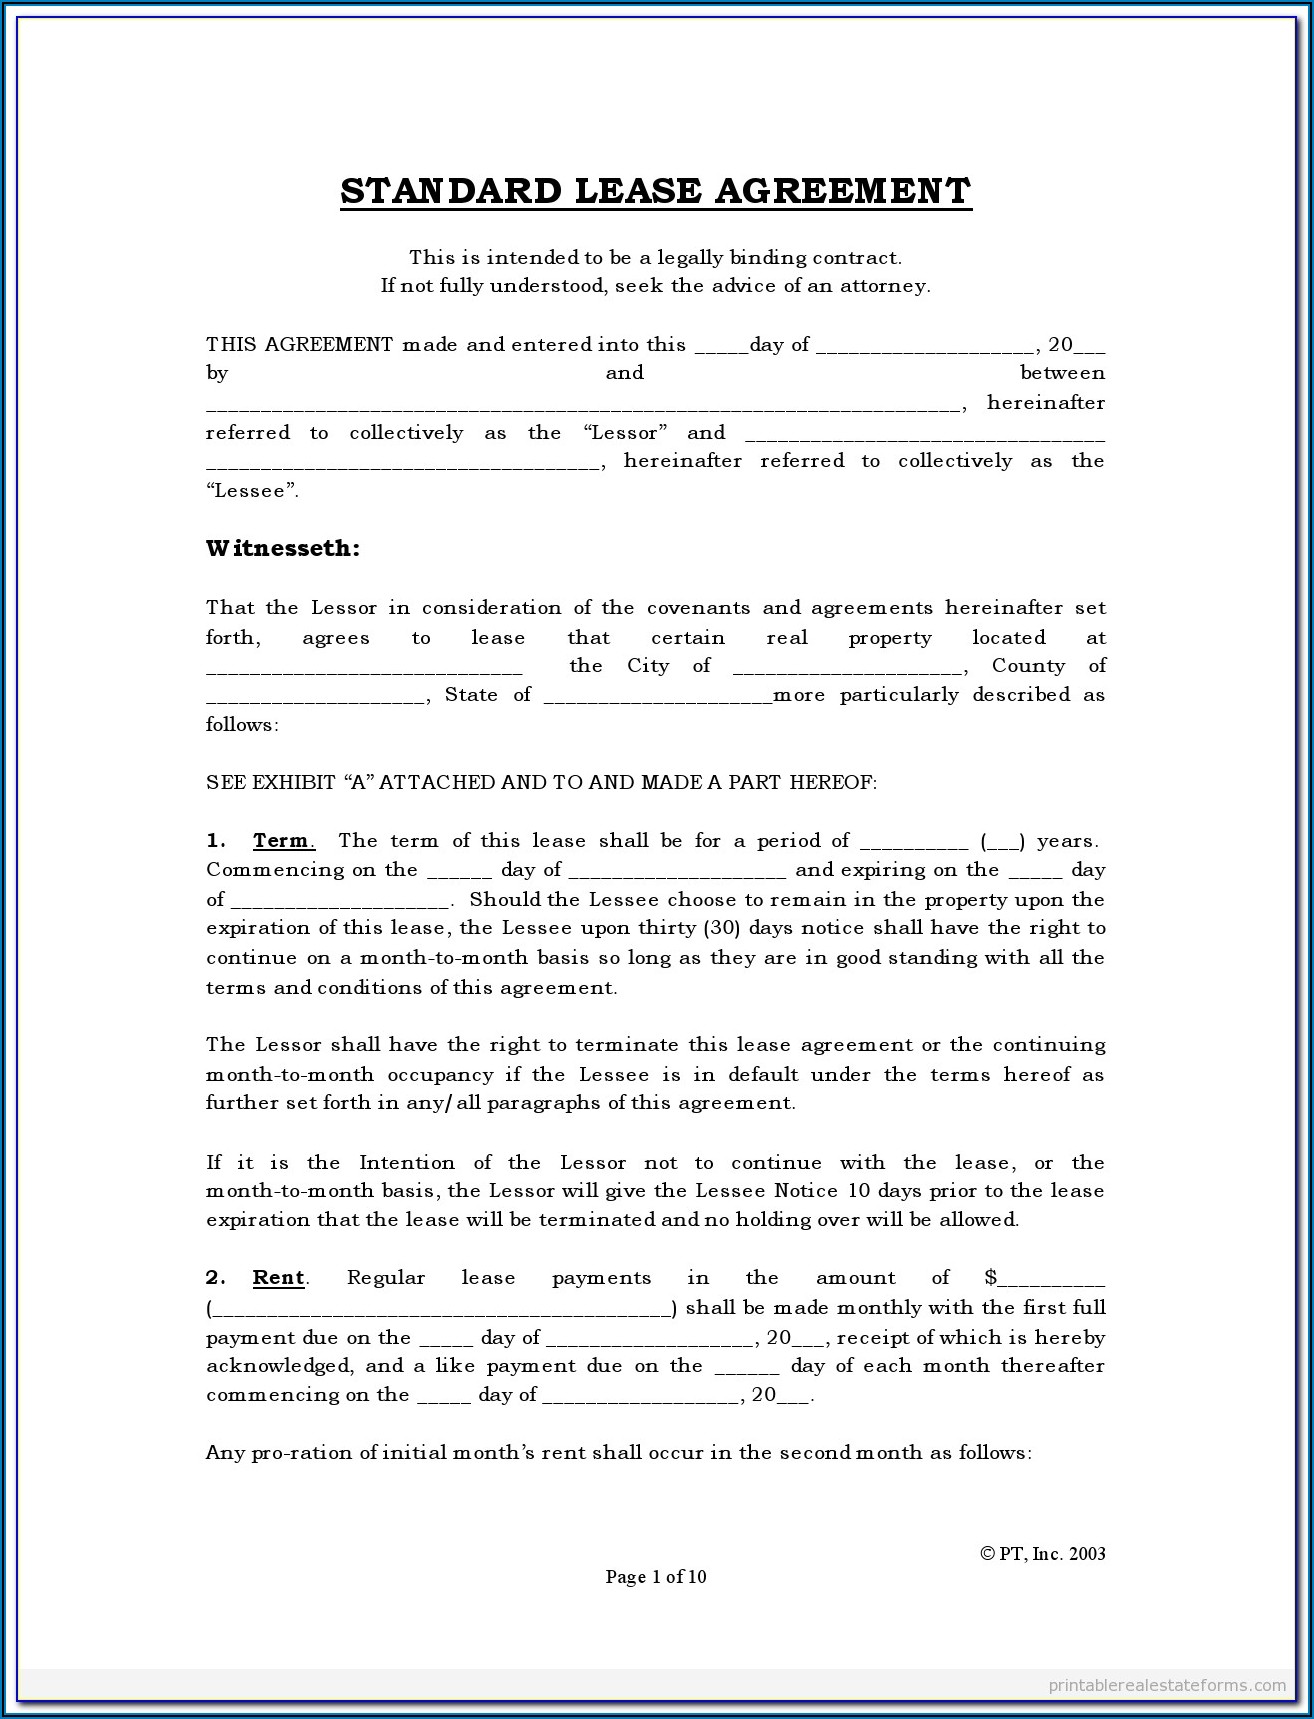 Free Commercial Real Estate Forms